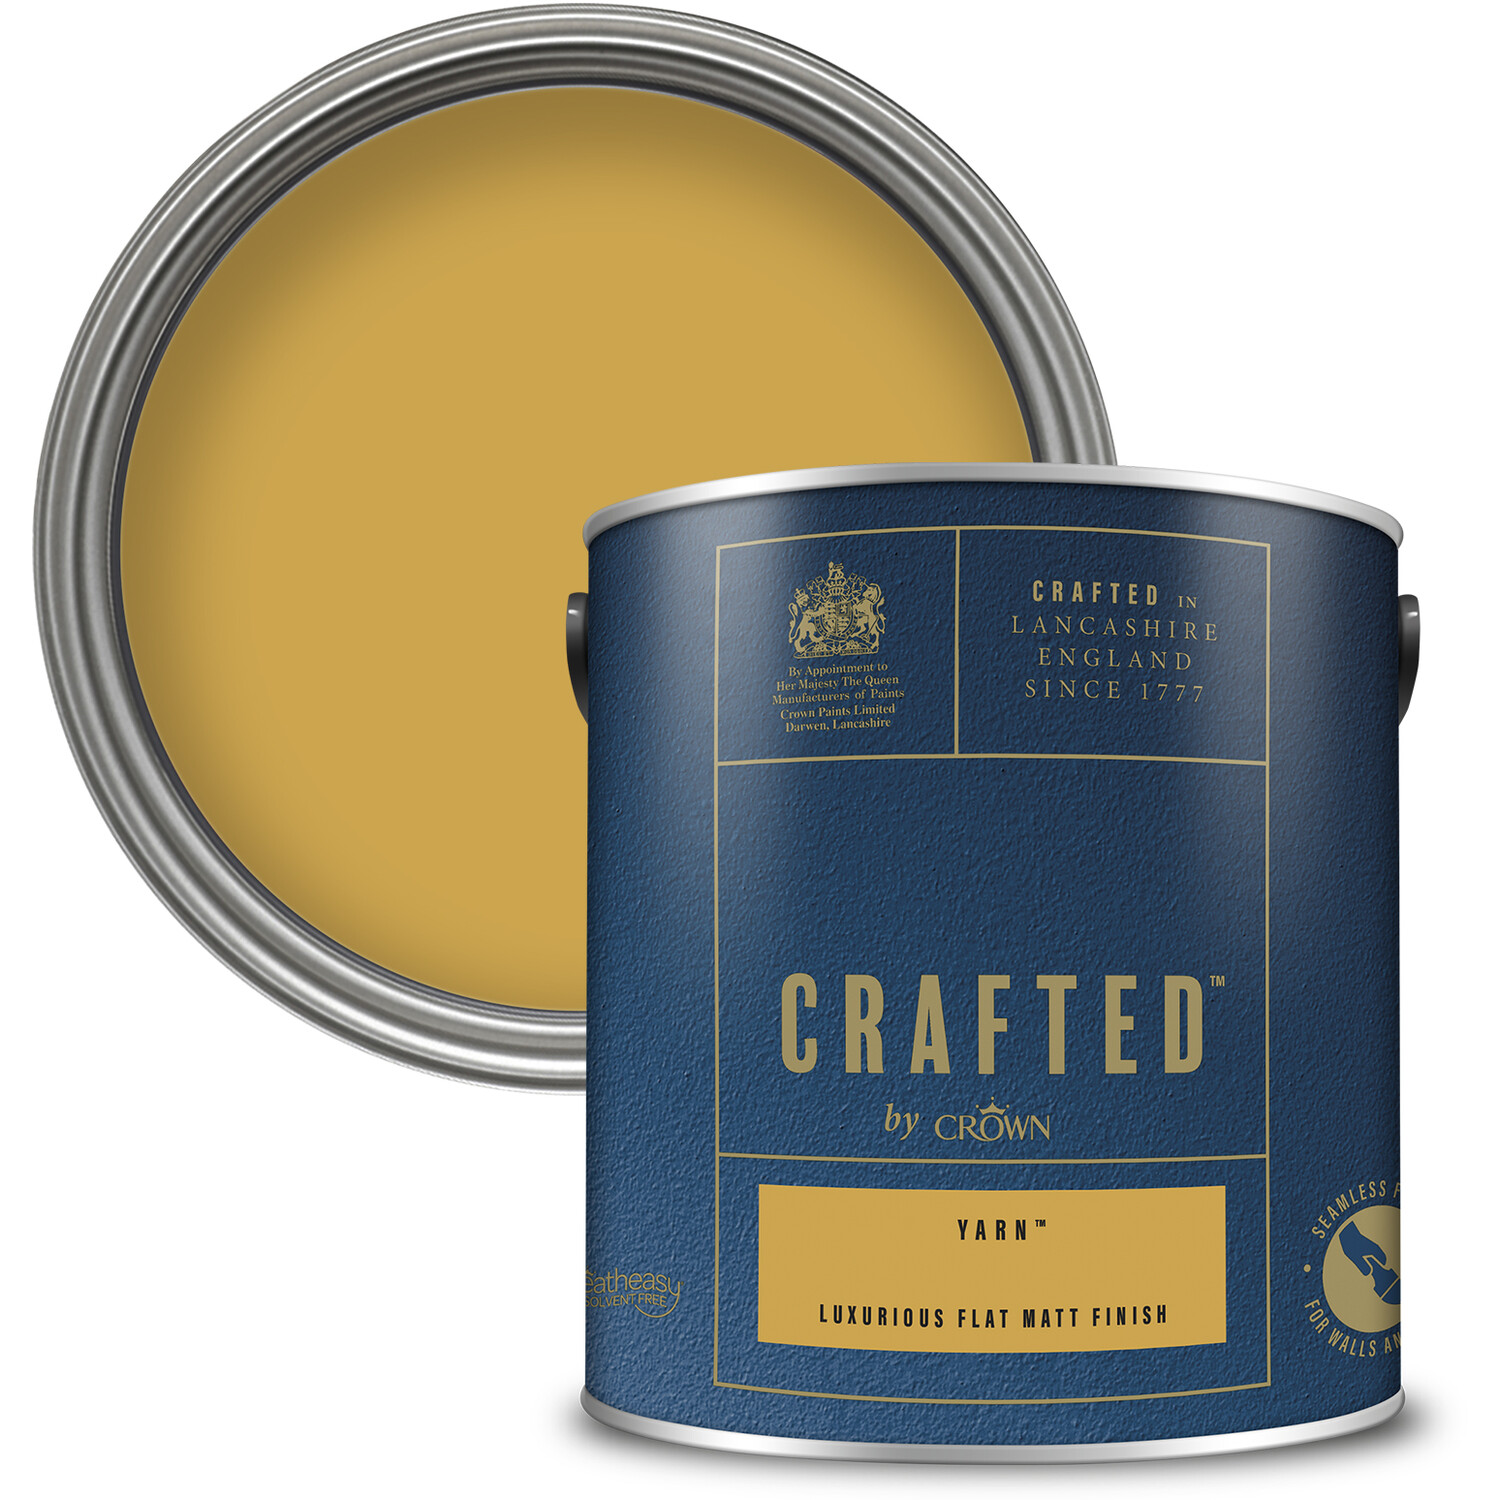 Crown Crafted Walls and Wood Yarn Luxurious Flat Matt Paint 2.5L Image 1